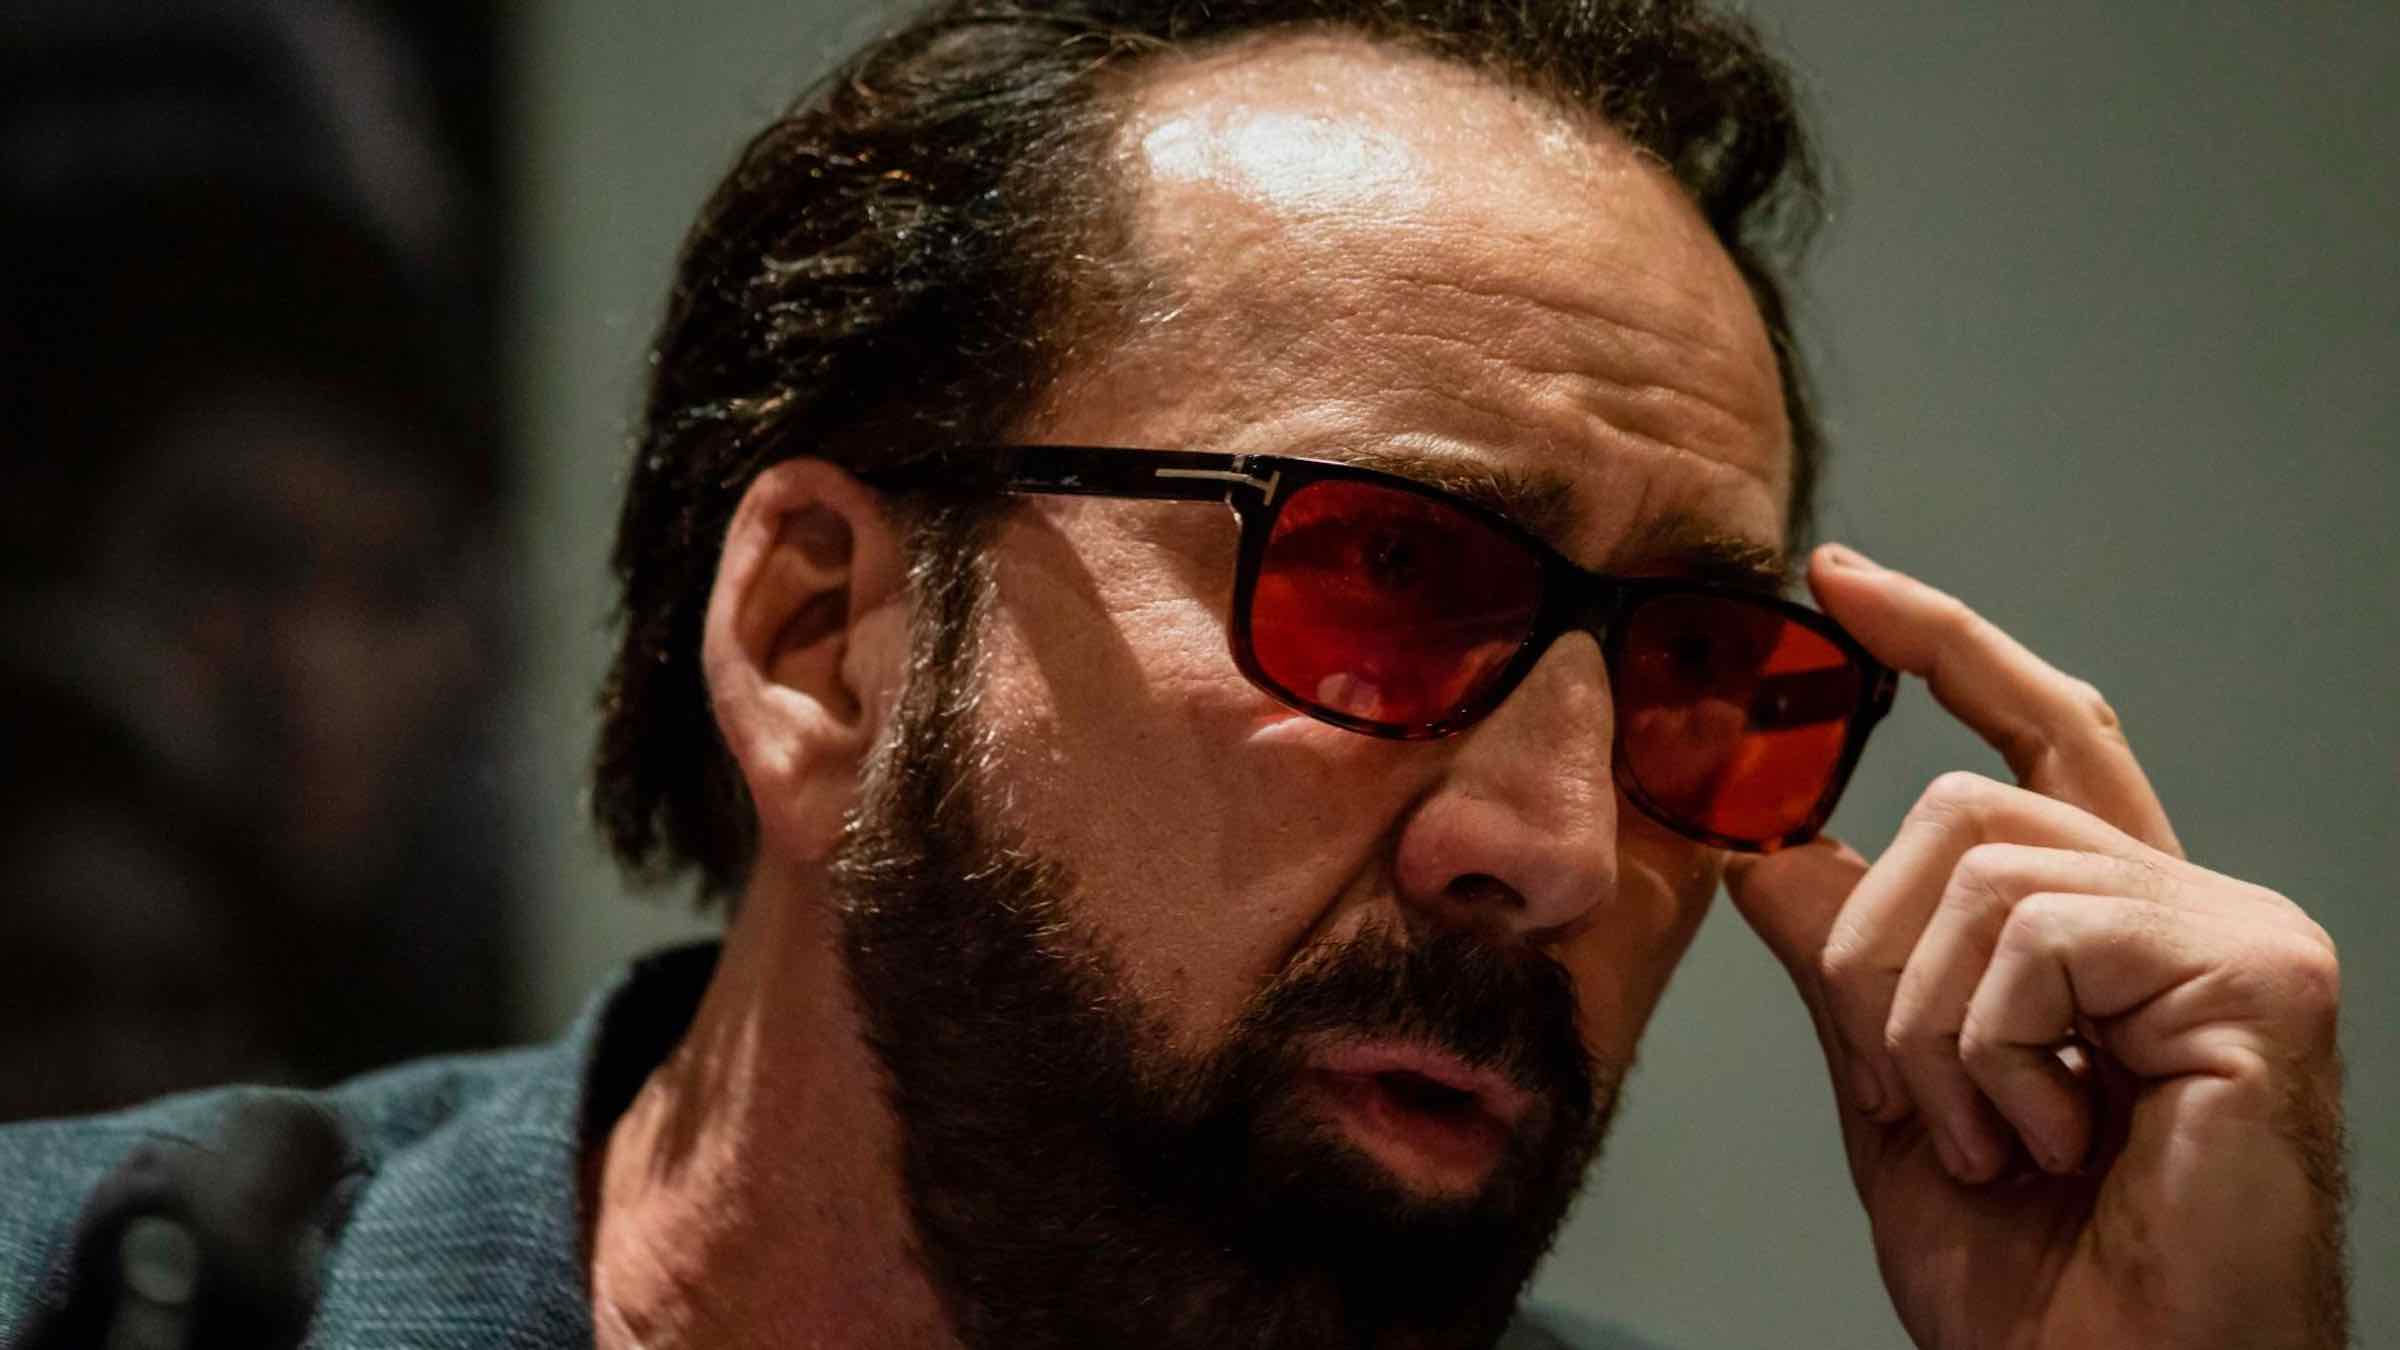 Nicolas Cage plays himself in 'The Unbearable Weight of Massive Talent'. Here's everything we know about the upcoming film.